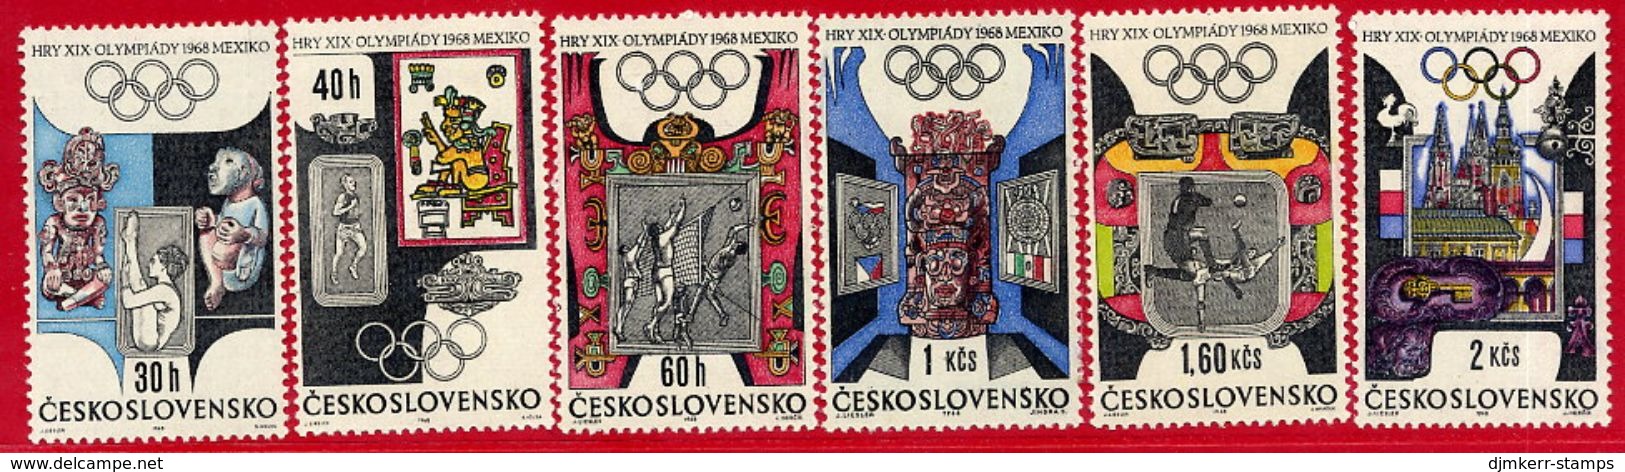 CZECHOSLOVAKIA 1968 Olympic Games Set MNH / **.  Michel 1781-86 - Unused Stamps